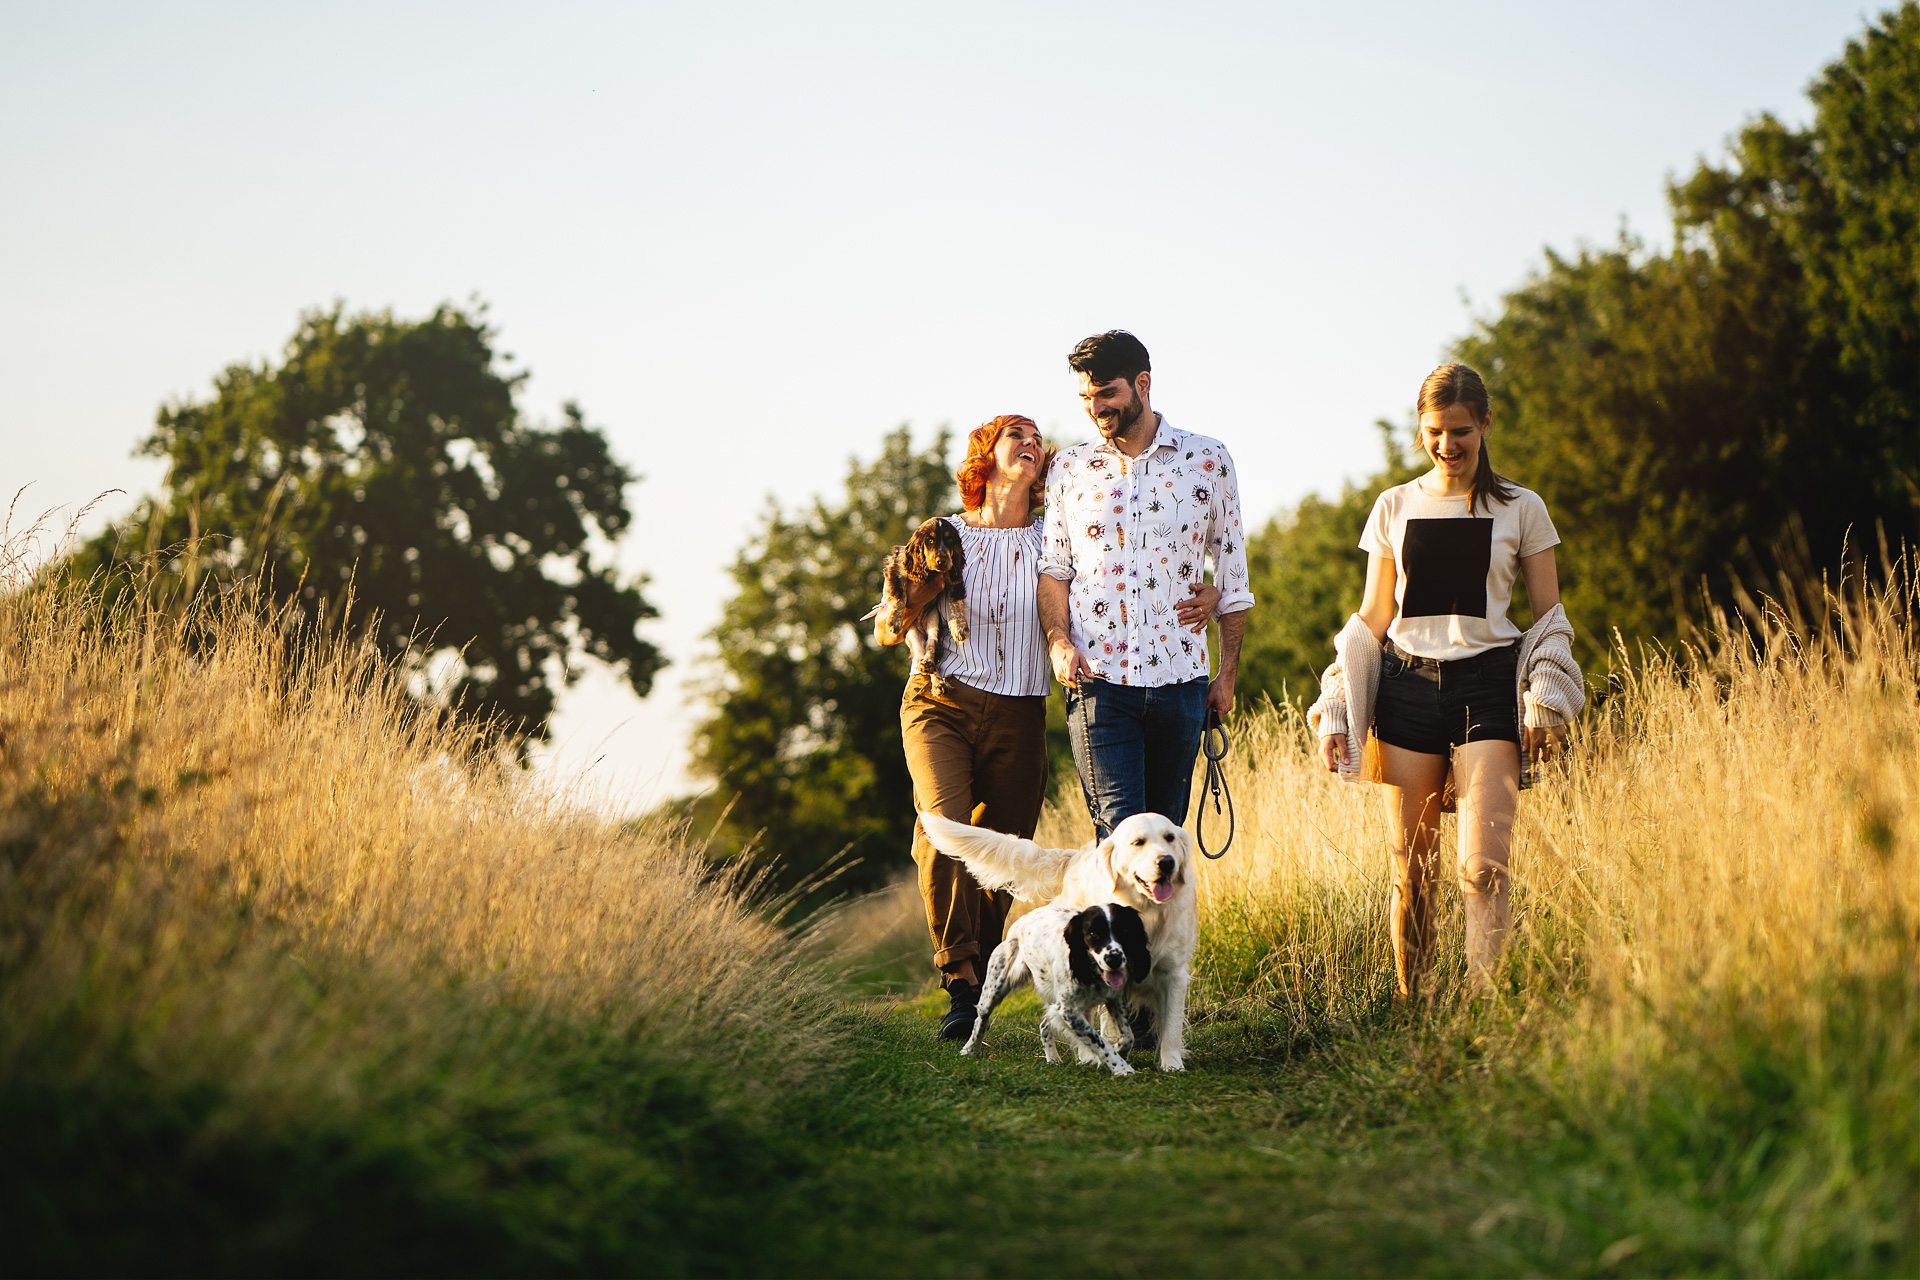 A family walking together in a field with long grass, with a puppy carried in the woman's arms and two dogs walking on leads. 